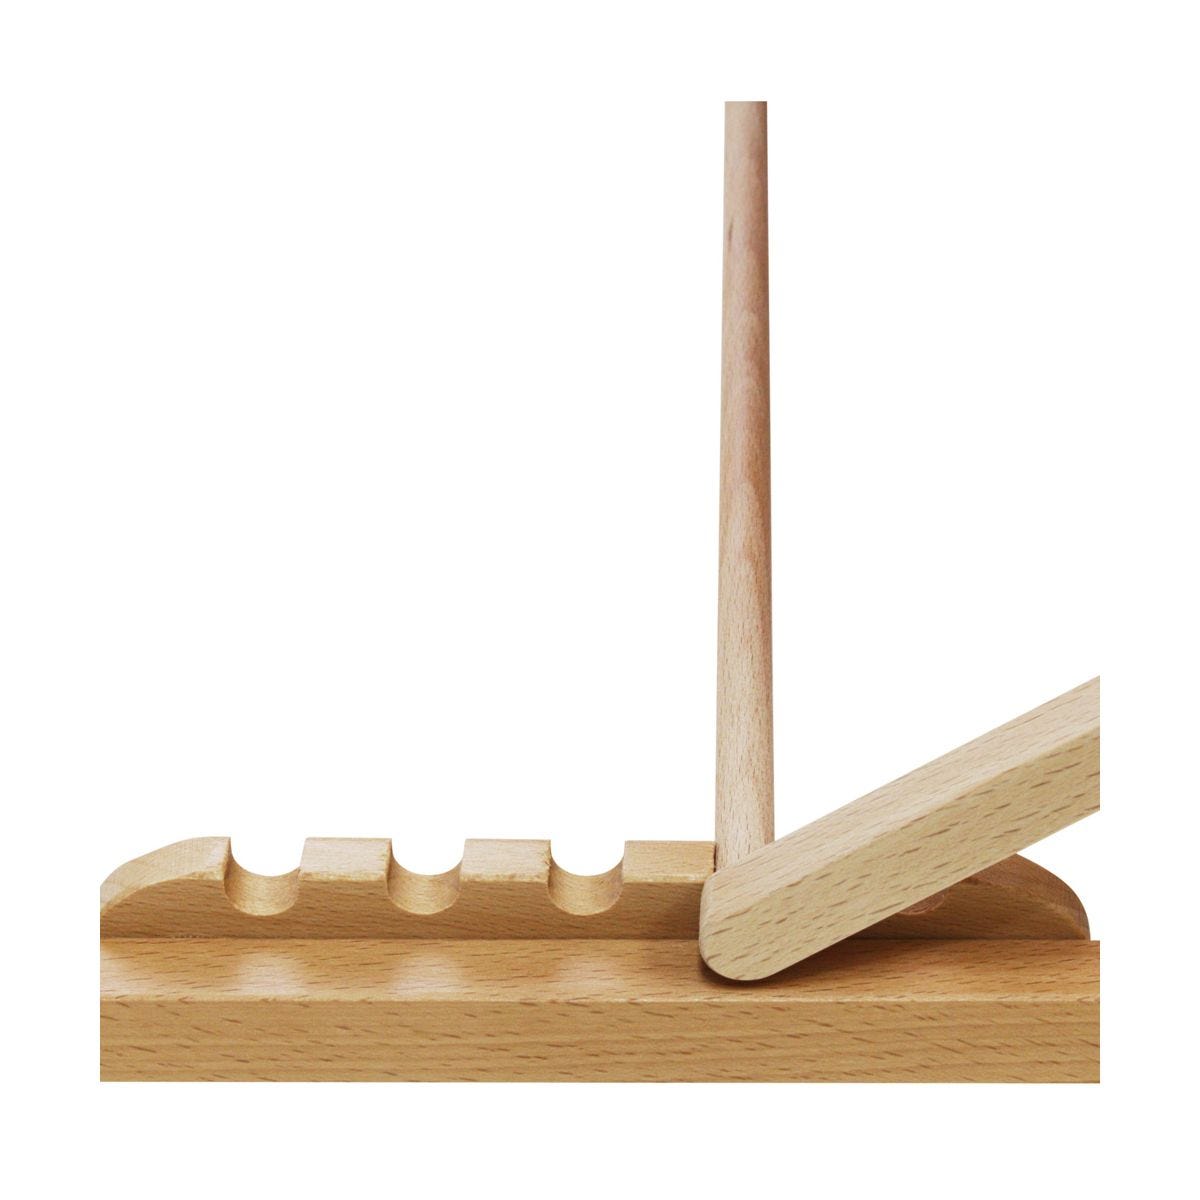 Mont Marte A3 Drawing Board with Elastic Band Beech Wood Tilting Design with Elastic Band for Securing Work. 